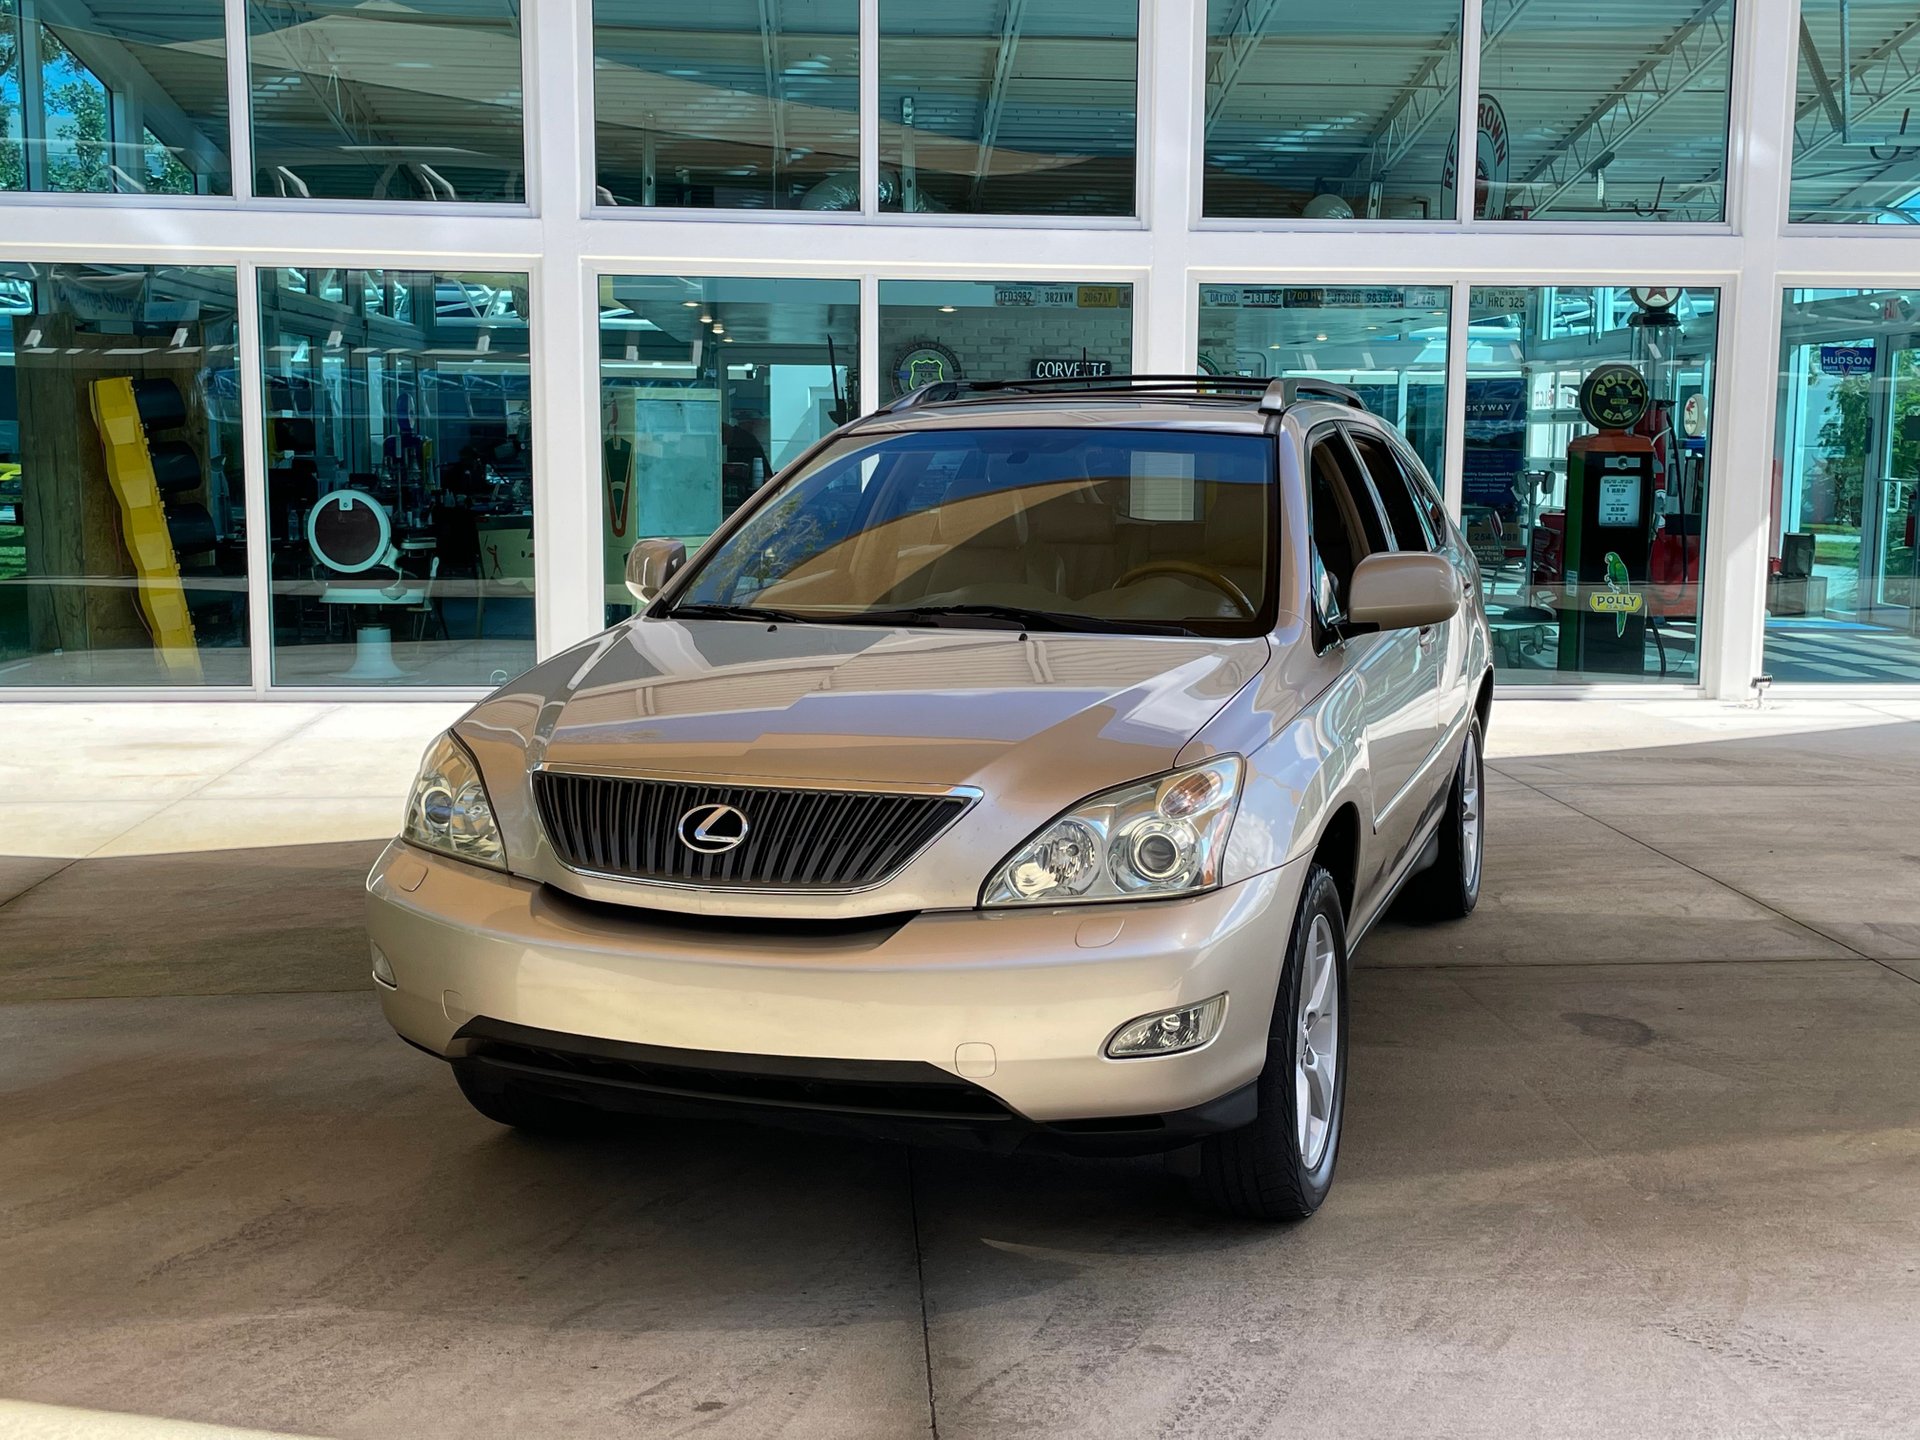 2006 Lexus RX330 | Classic Cars & Used Cars For Sale in Tampa, FL